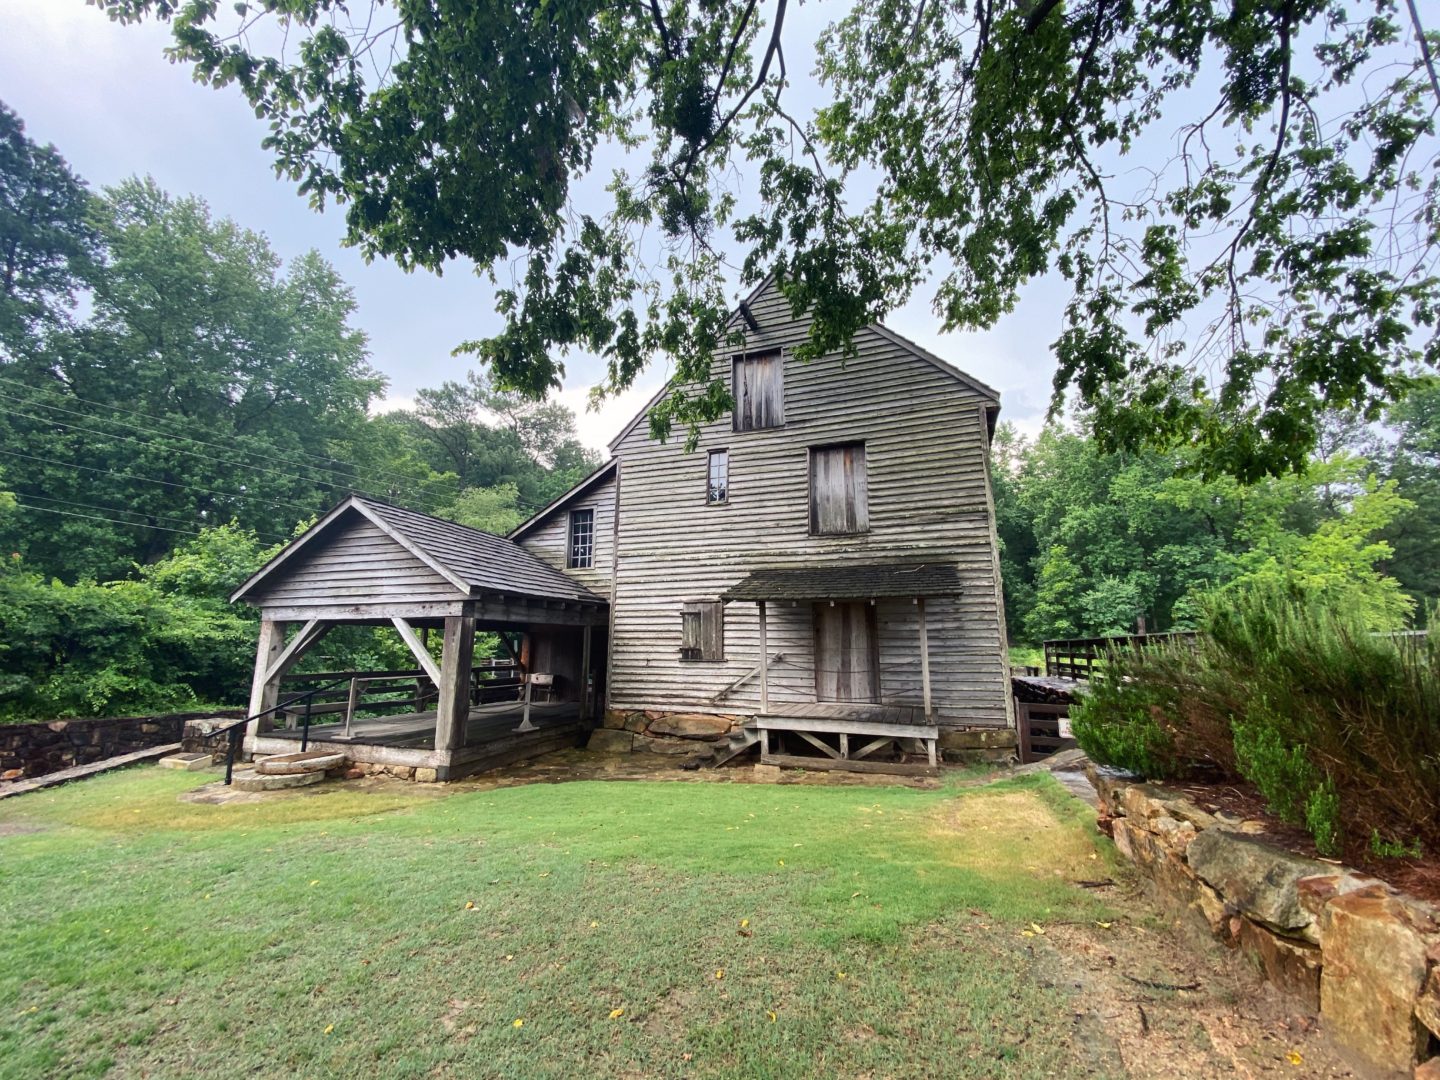 Exploring Raleigh: Historic Yates Mill County Park